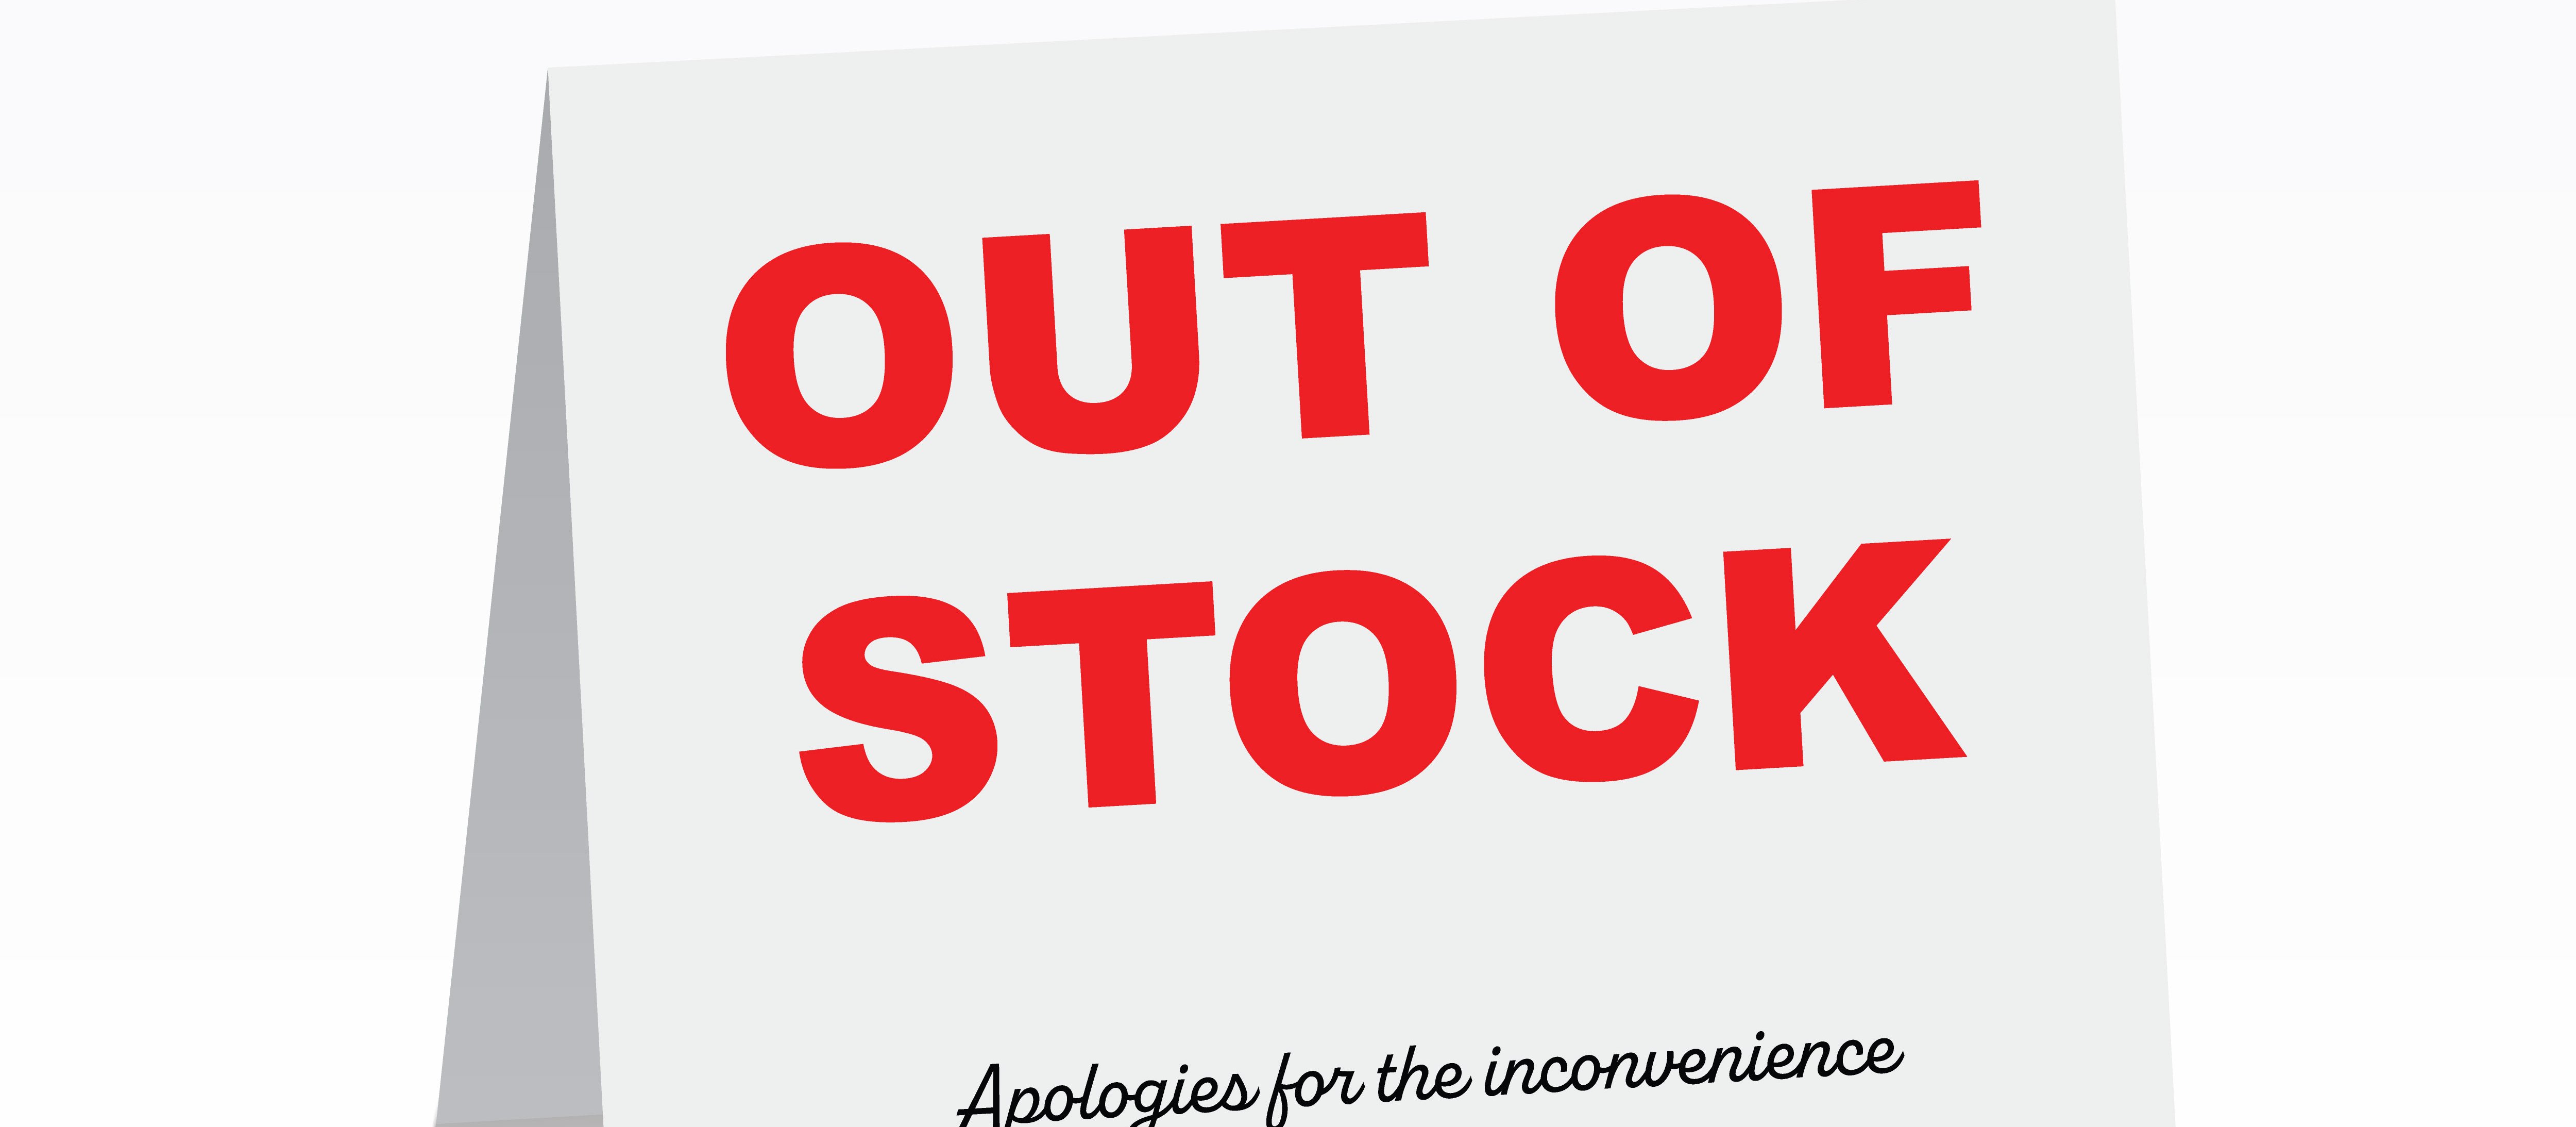 Out-of-Stock sign